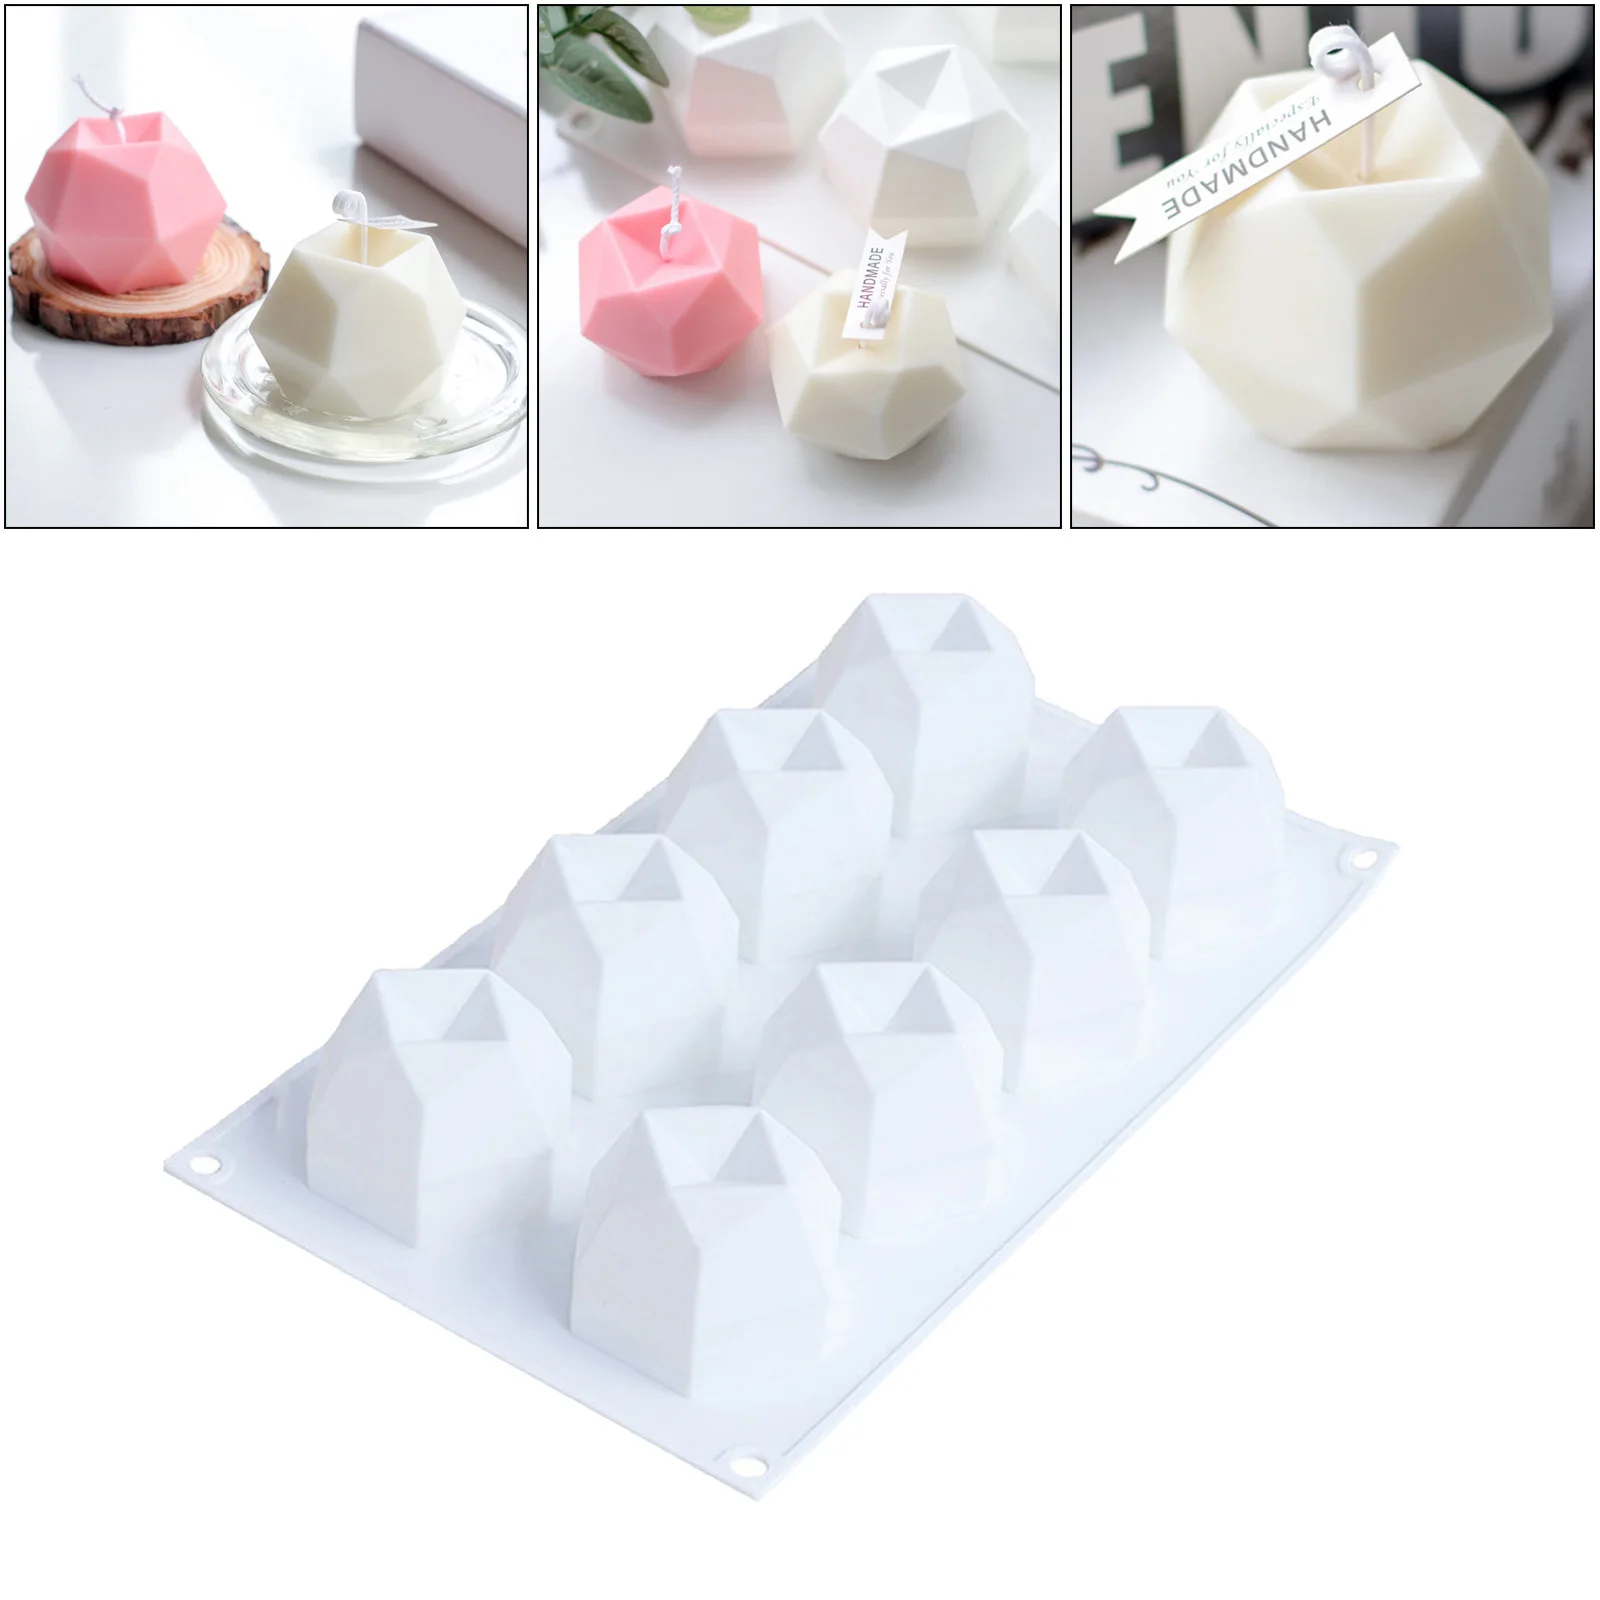 Silicone Diamond Cube Silicone Molds DIY Candle Making Mold 3D Silicone Soy Wax Candle DIY Crafting Mold Handmade Soap Moulds